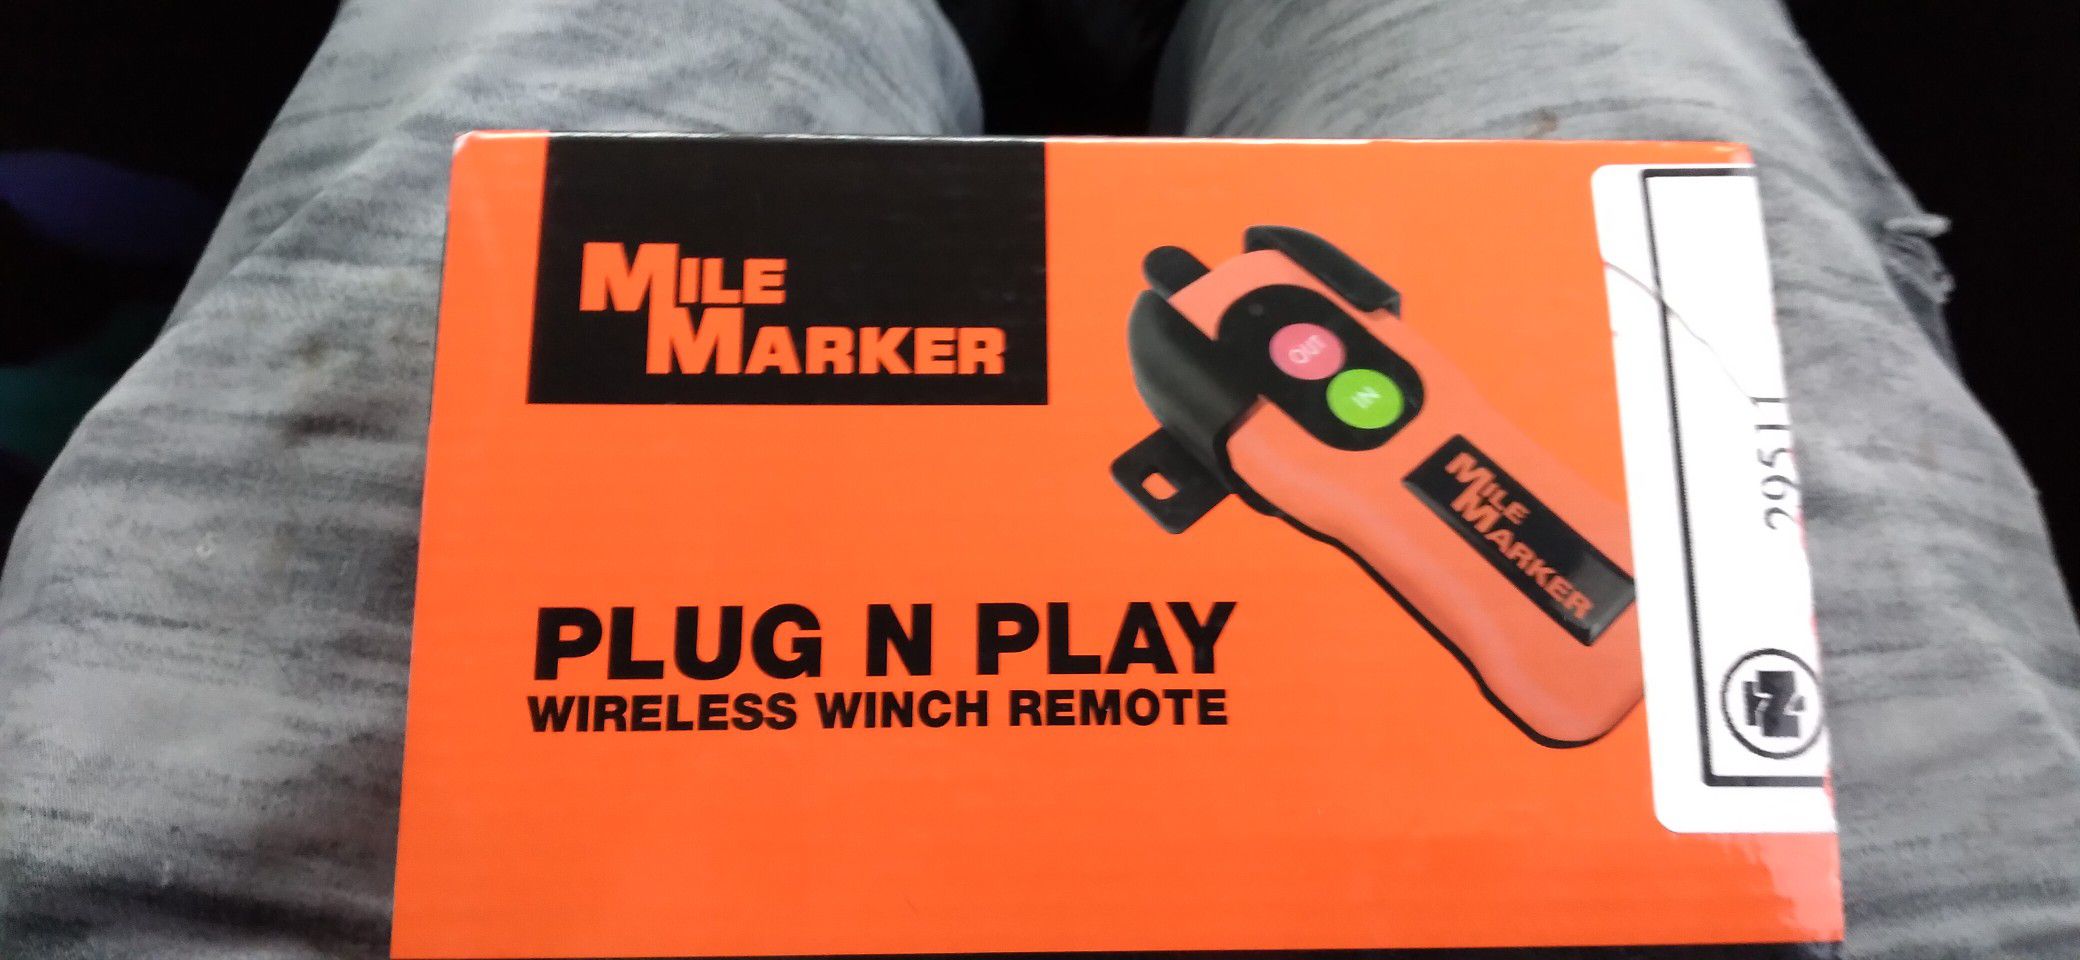 Mile Marker wiresless winch remote.